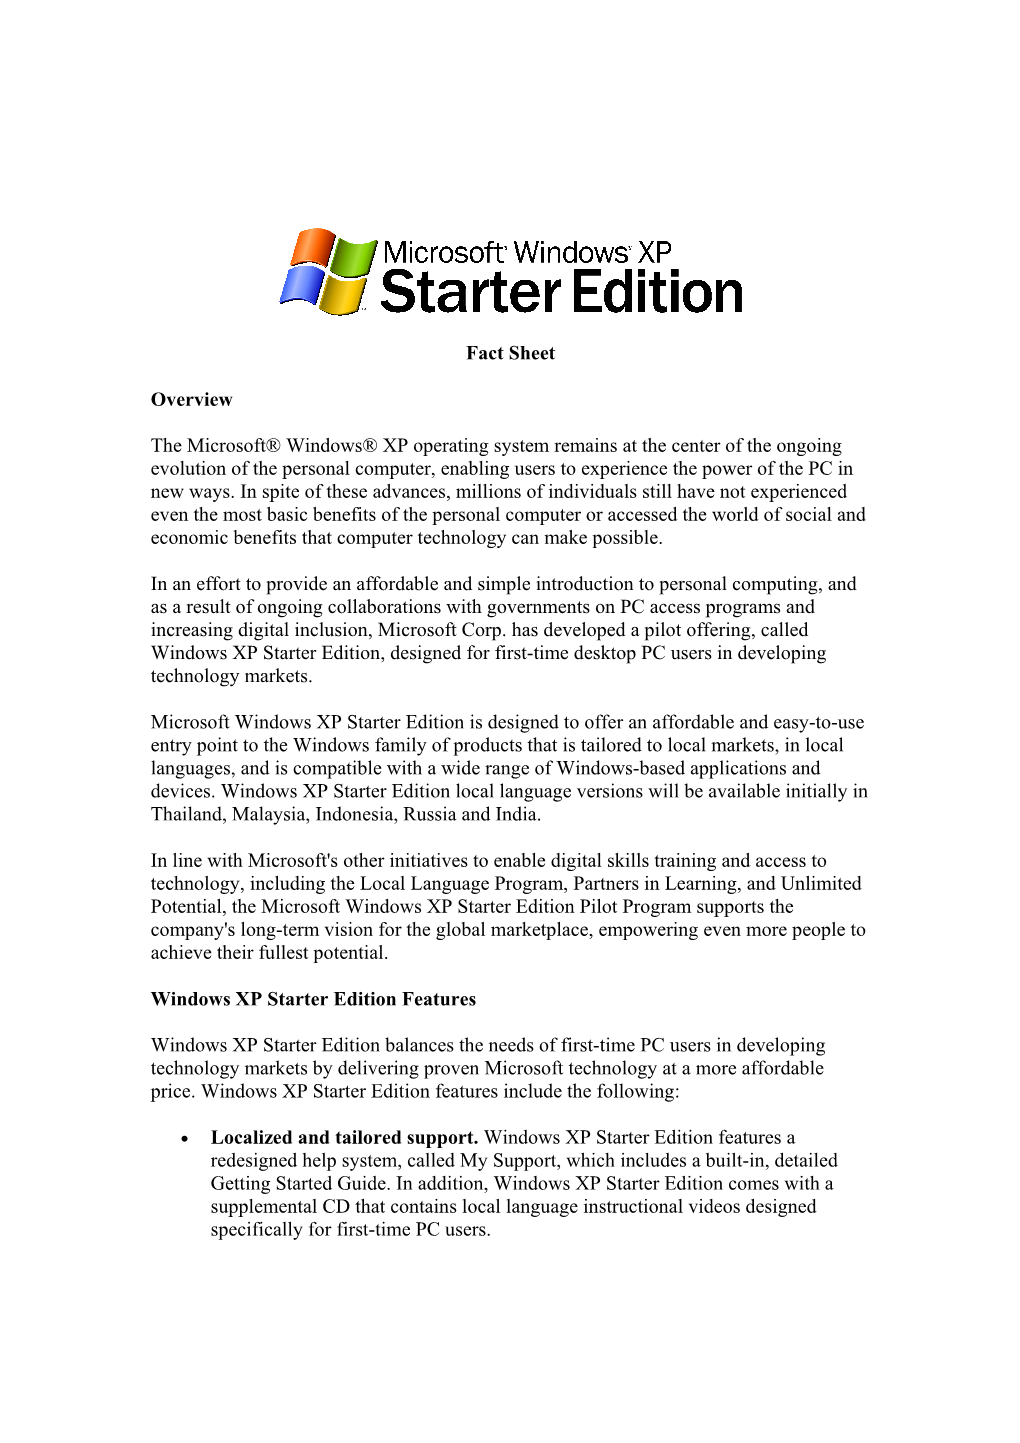 Fact Sheet Overview the Microsoft® Windows® XP Operating System